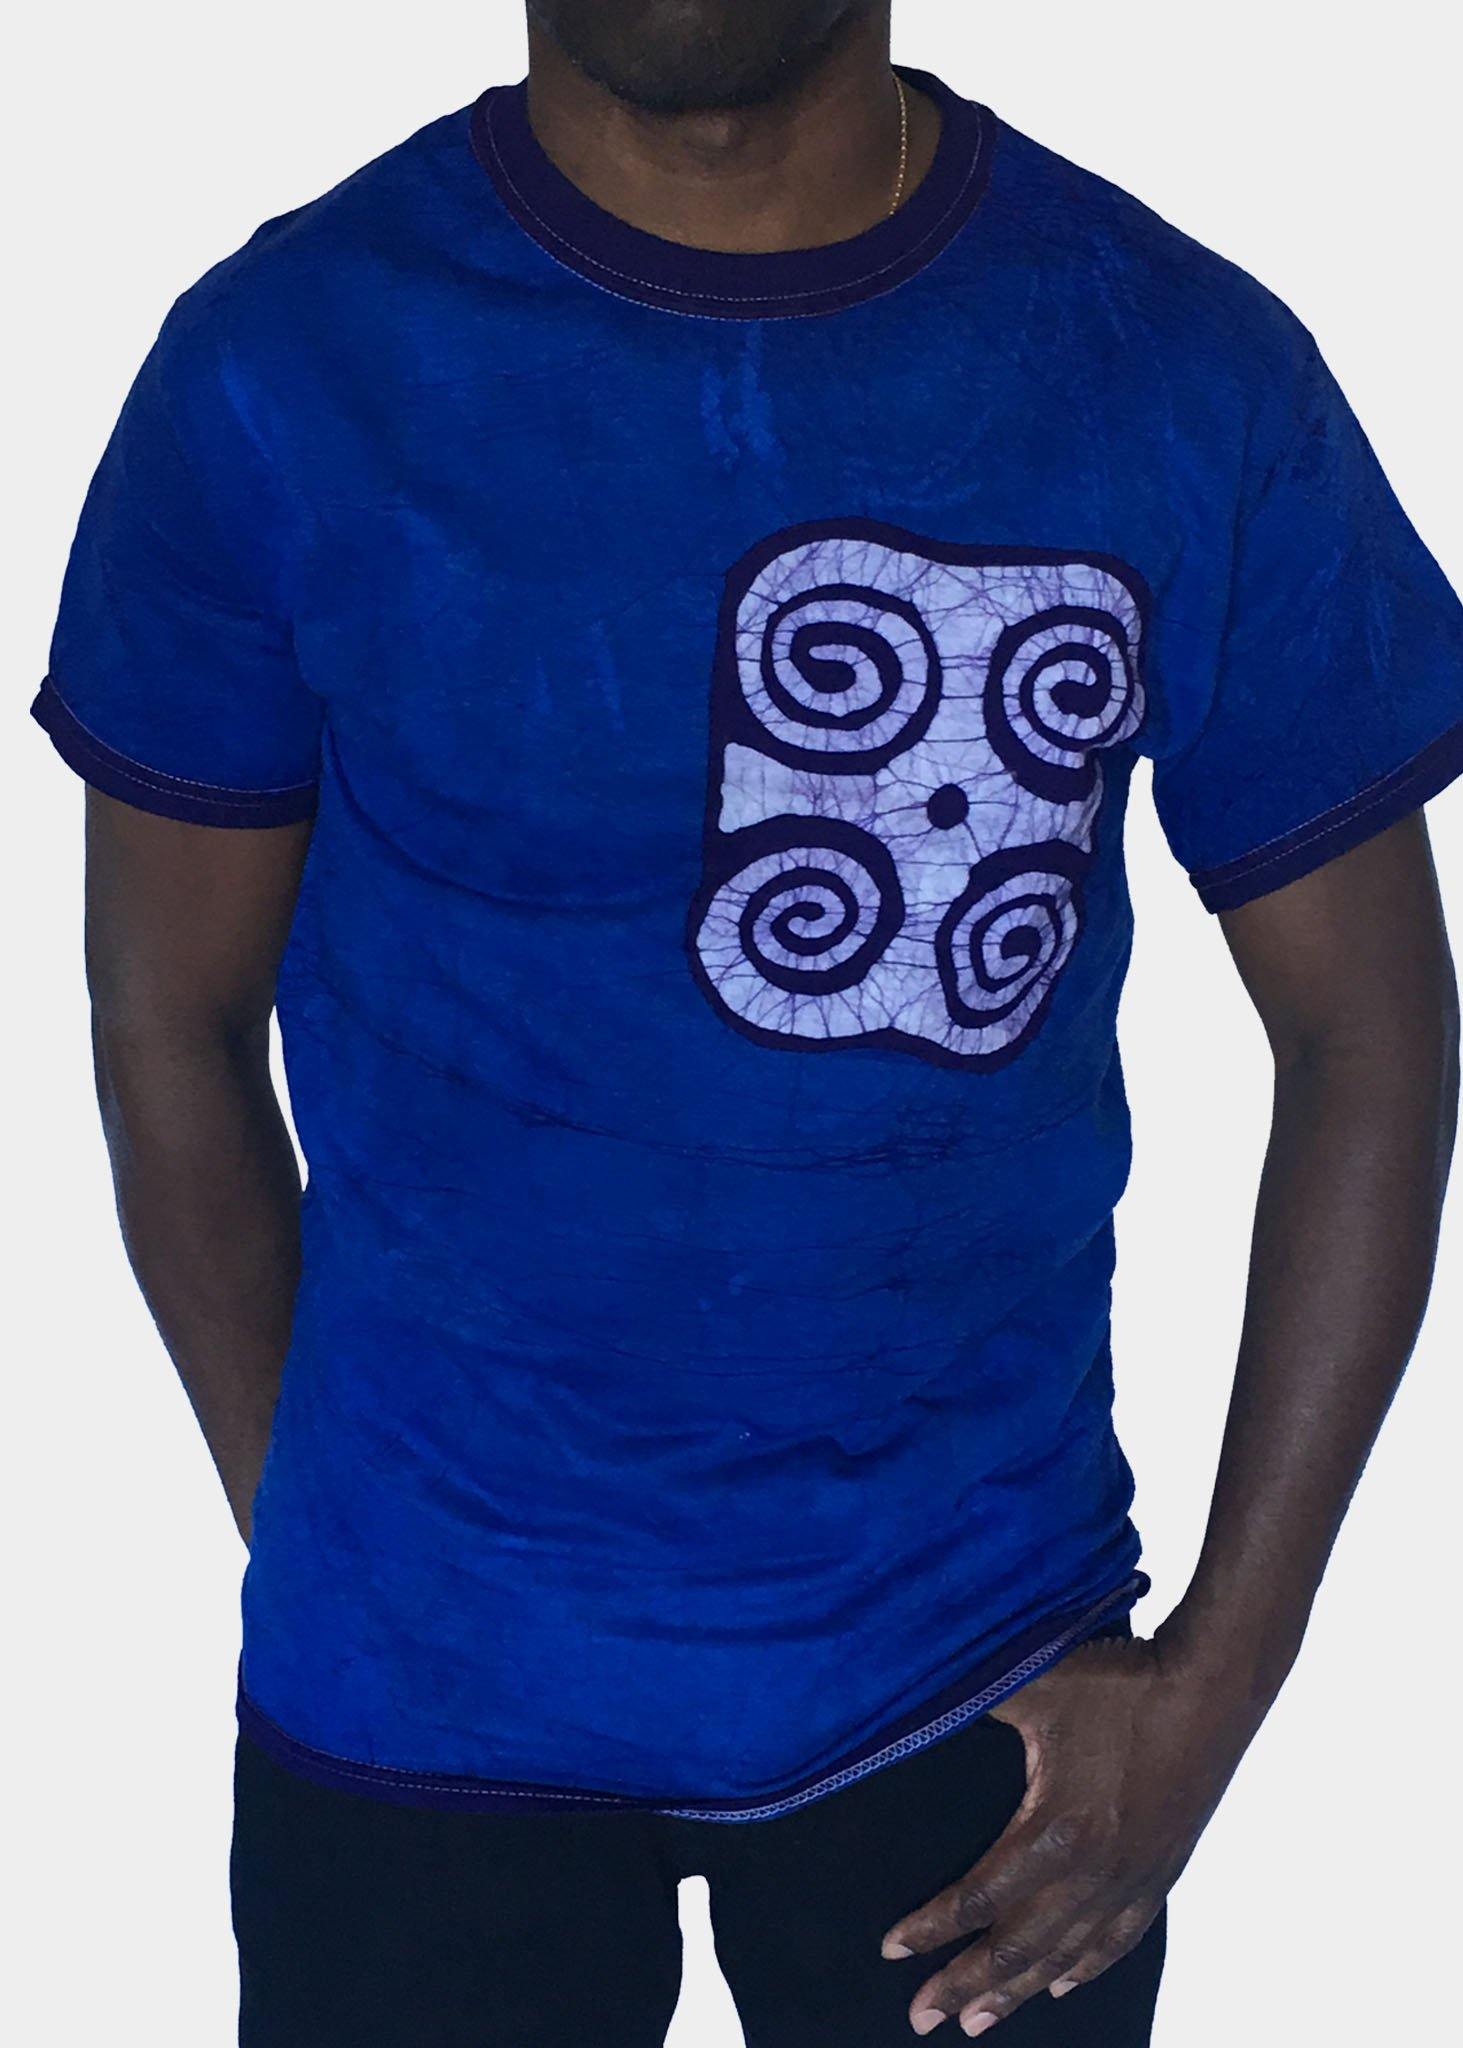 Blue and White Short Sleeve Batik T-Shirt with Ram's Horns Symbol -Contemporary and Colorful Ensemble-African apparel and accessories